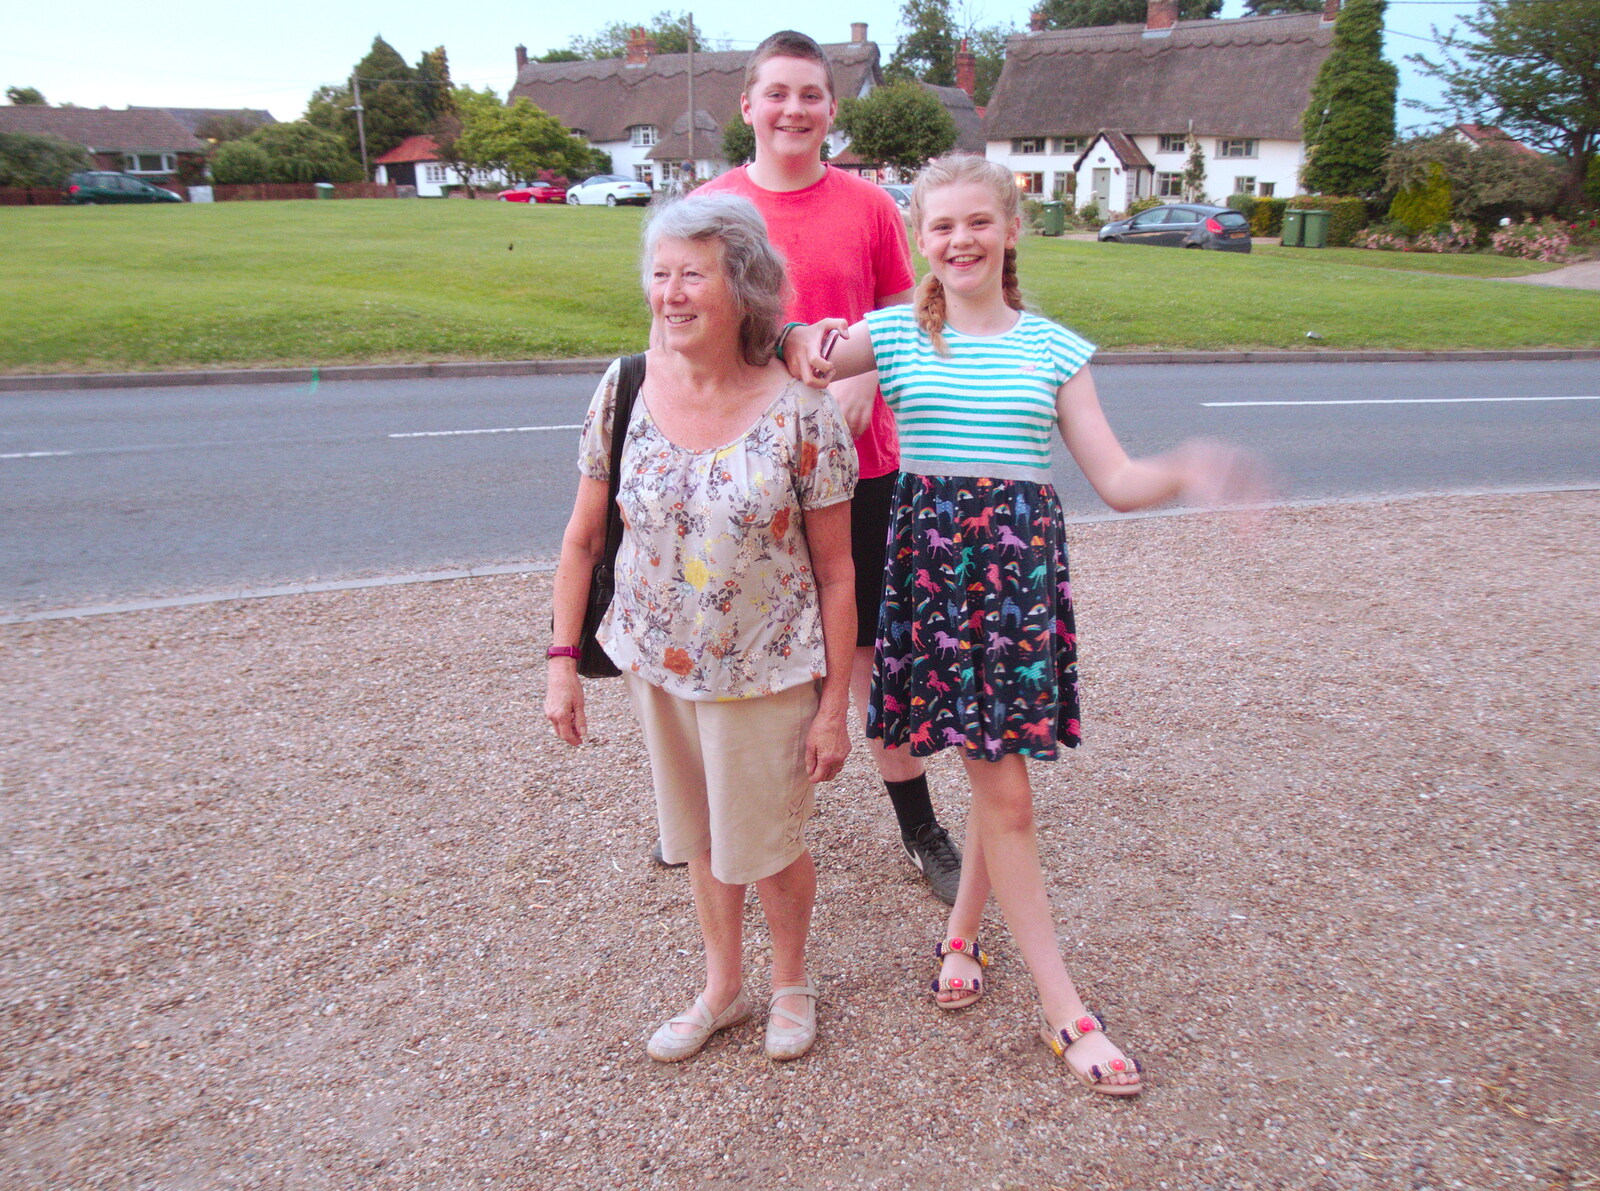 A Postcard from Boxford and BSCC at Pulham, Suffolk and Norfolk - 13th July 2019: Sylvia, Matthew and Jessica